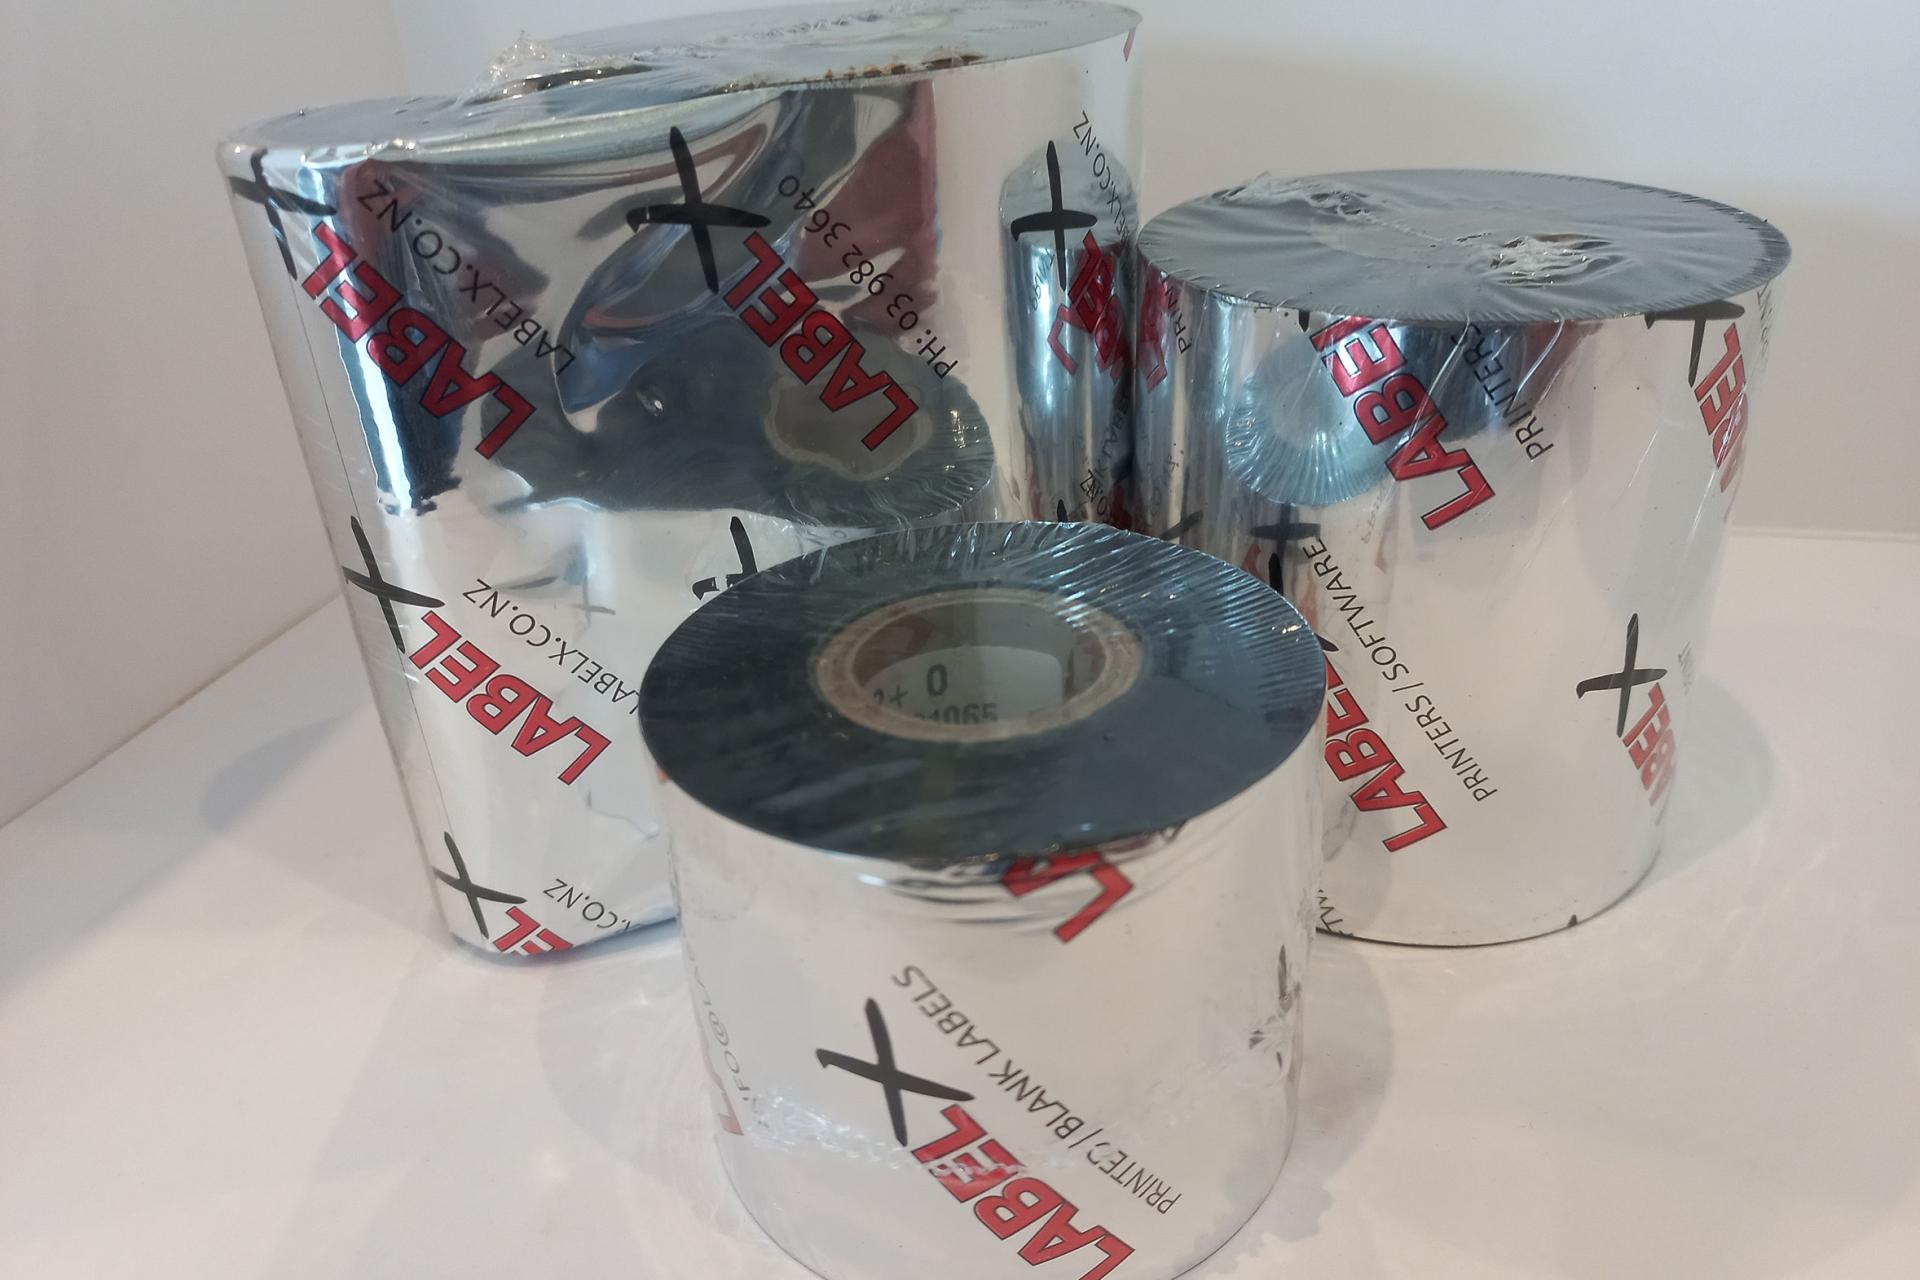 Label X branded and wrapped label rolls